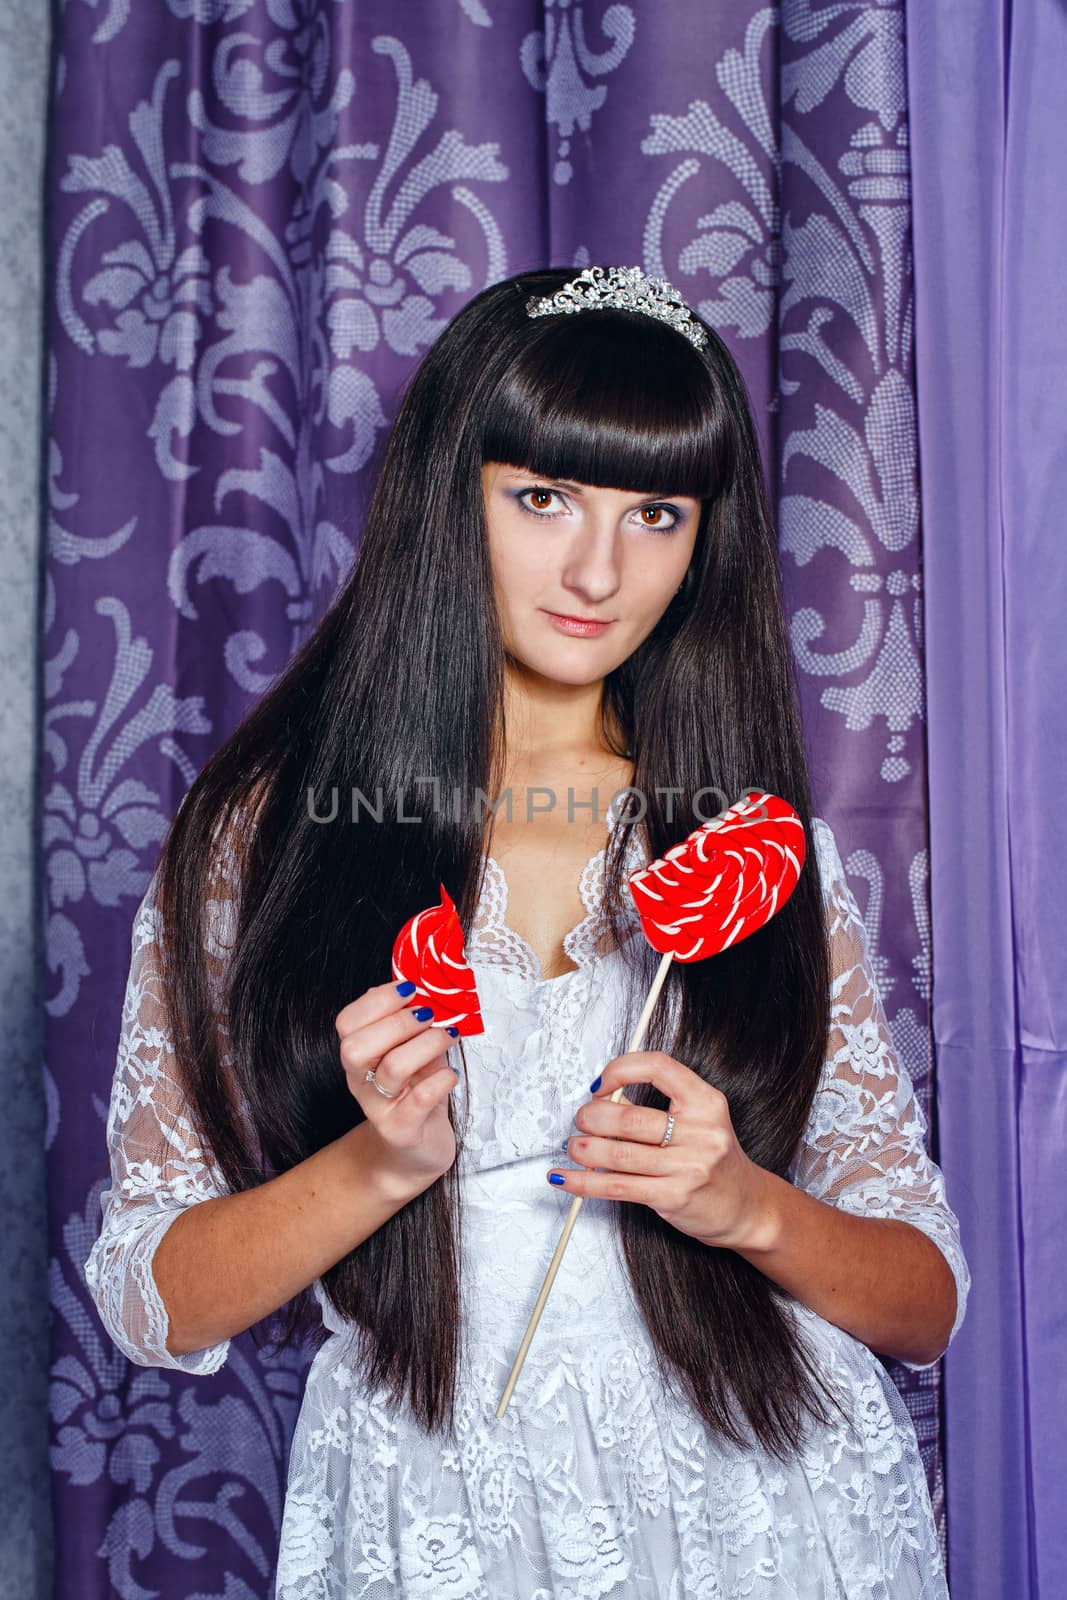 Attractive young brunette girl holding a lollipop with heart-shaped